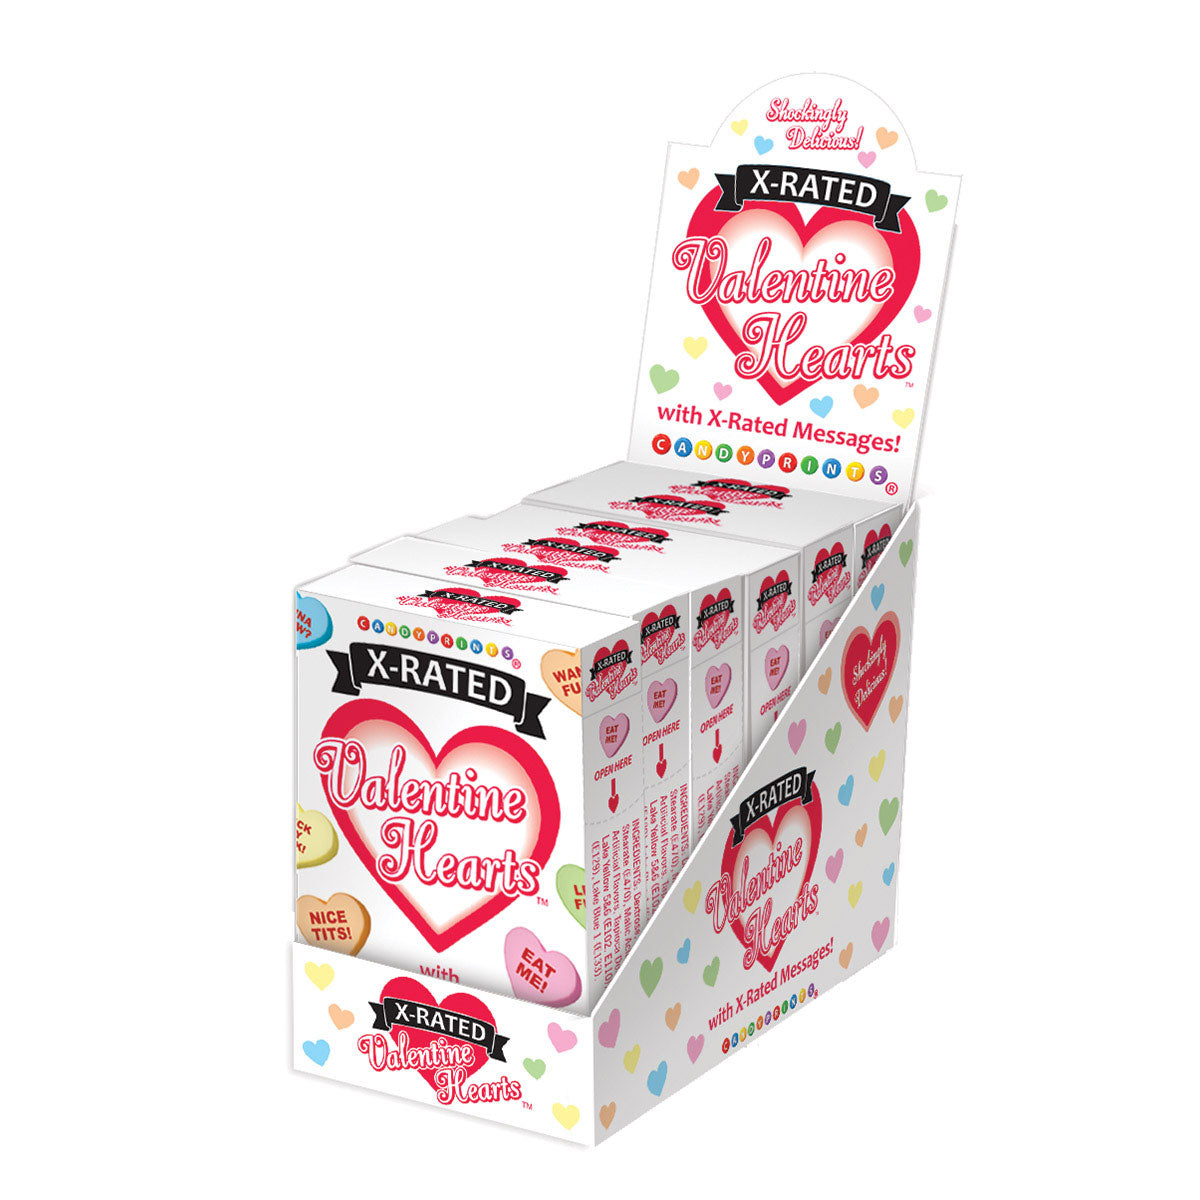 Valentine X-Rated Candy Hearts 2oz Boxes - Display of 6